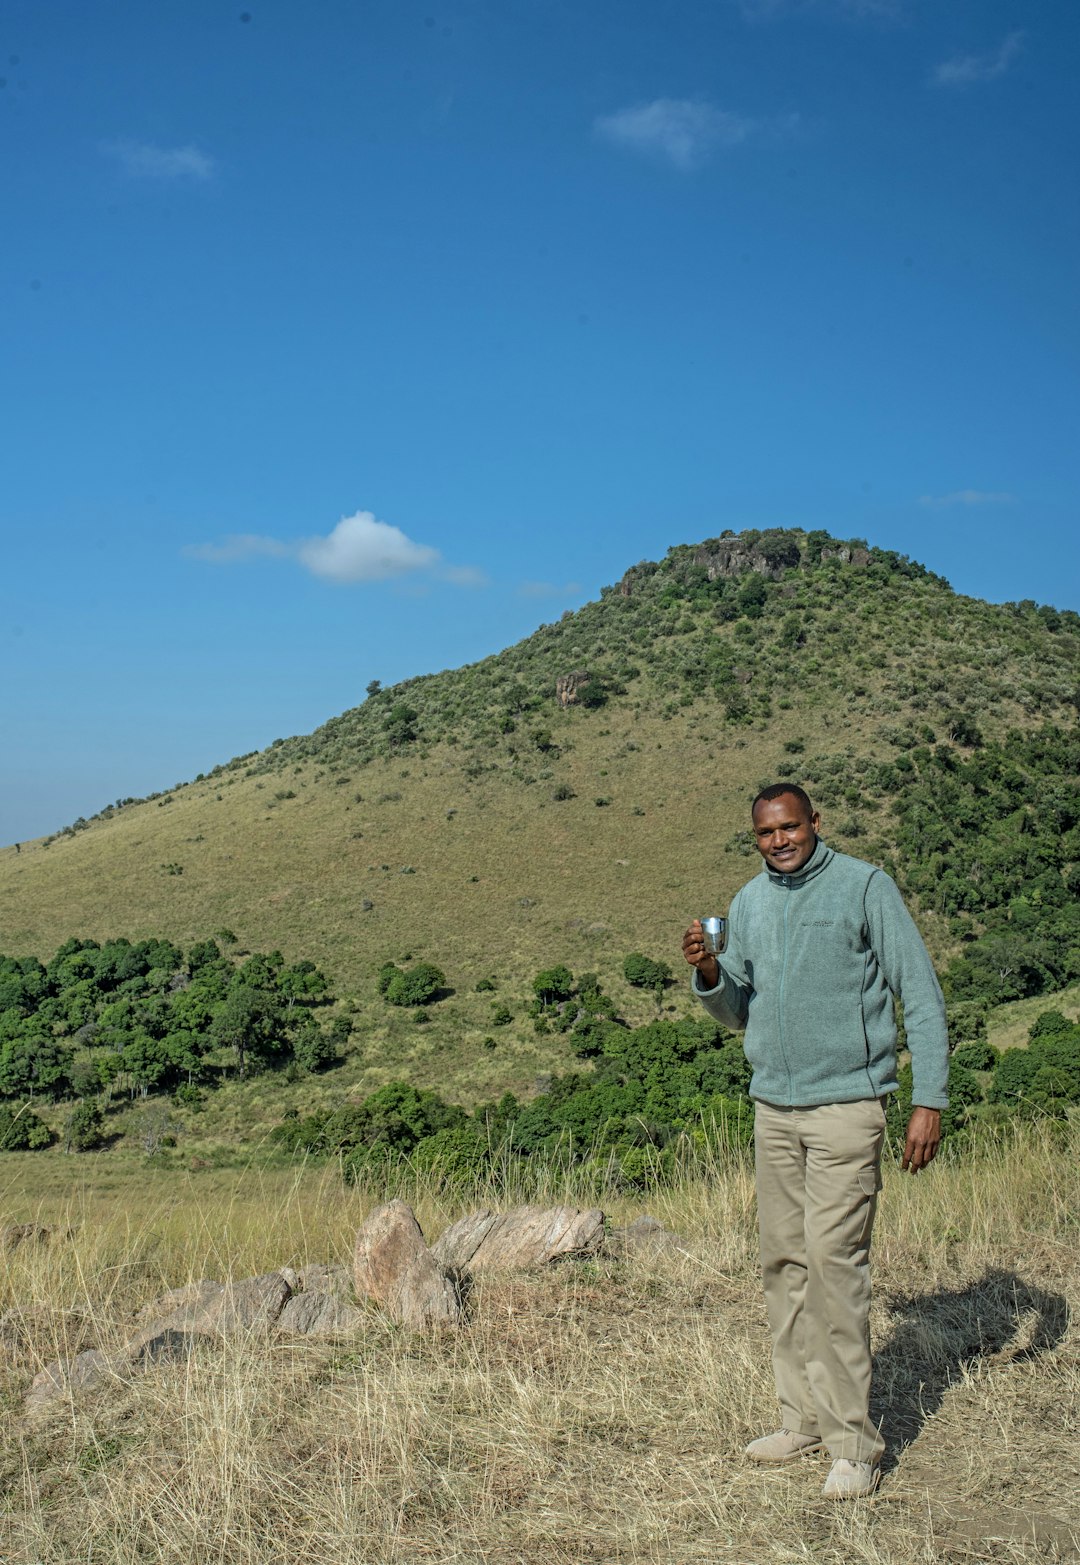 travelers stories about Hill in Oloololo, Kenya